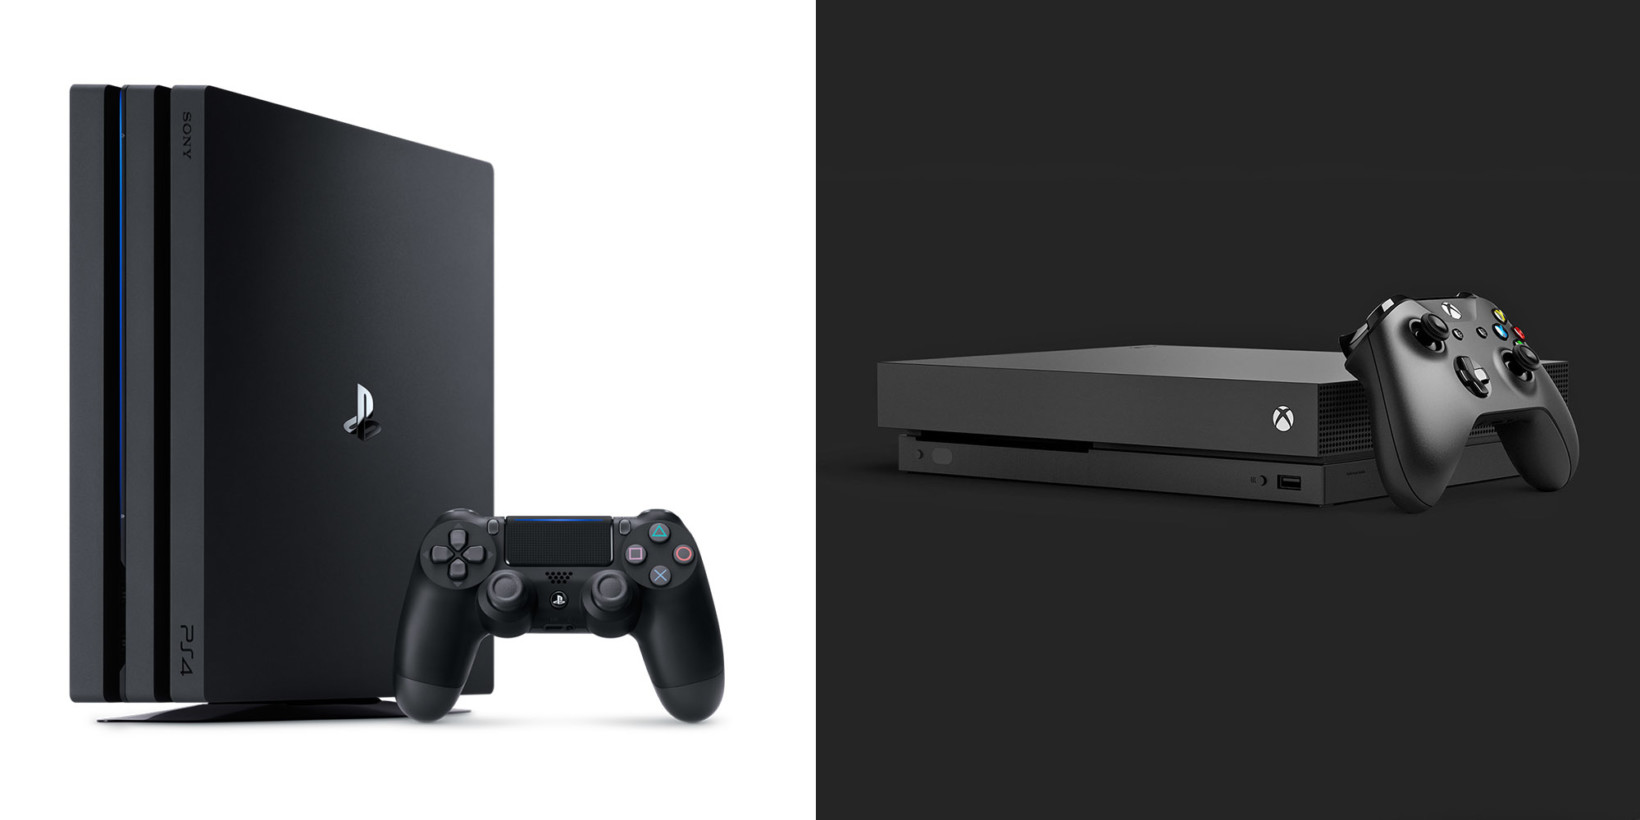 Should You Get a PS4 Pro or an Xbox One X?